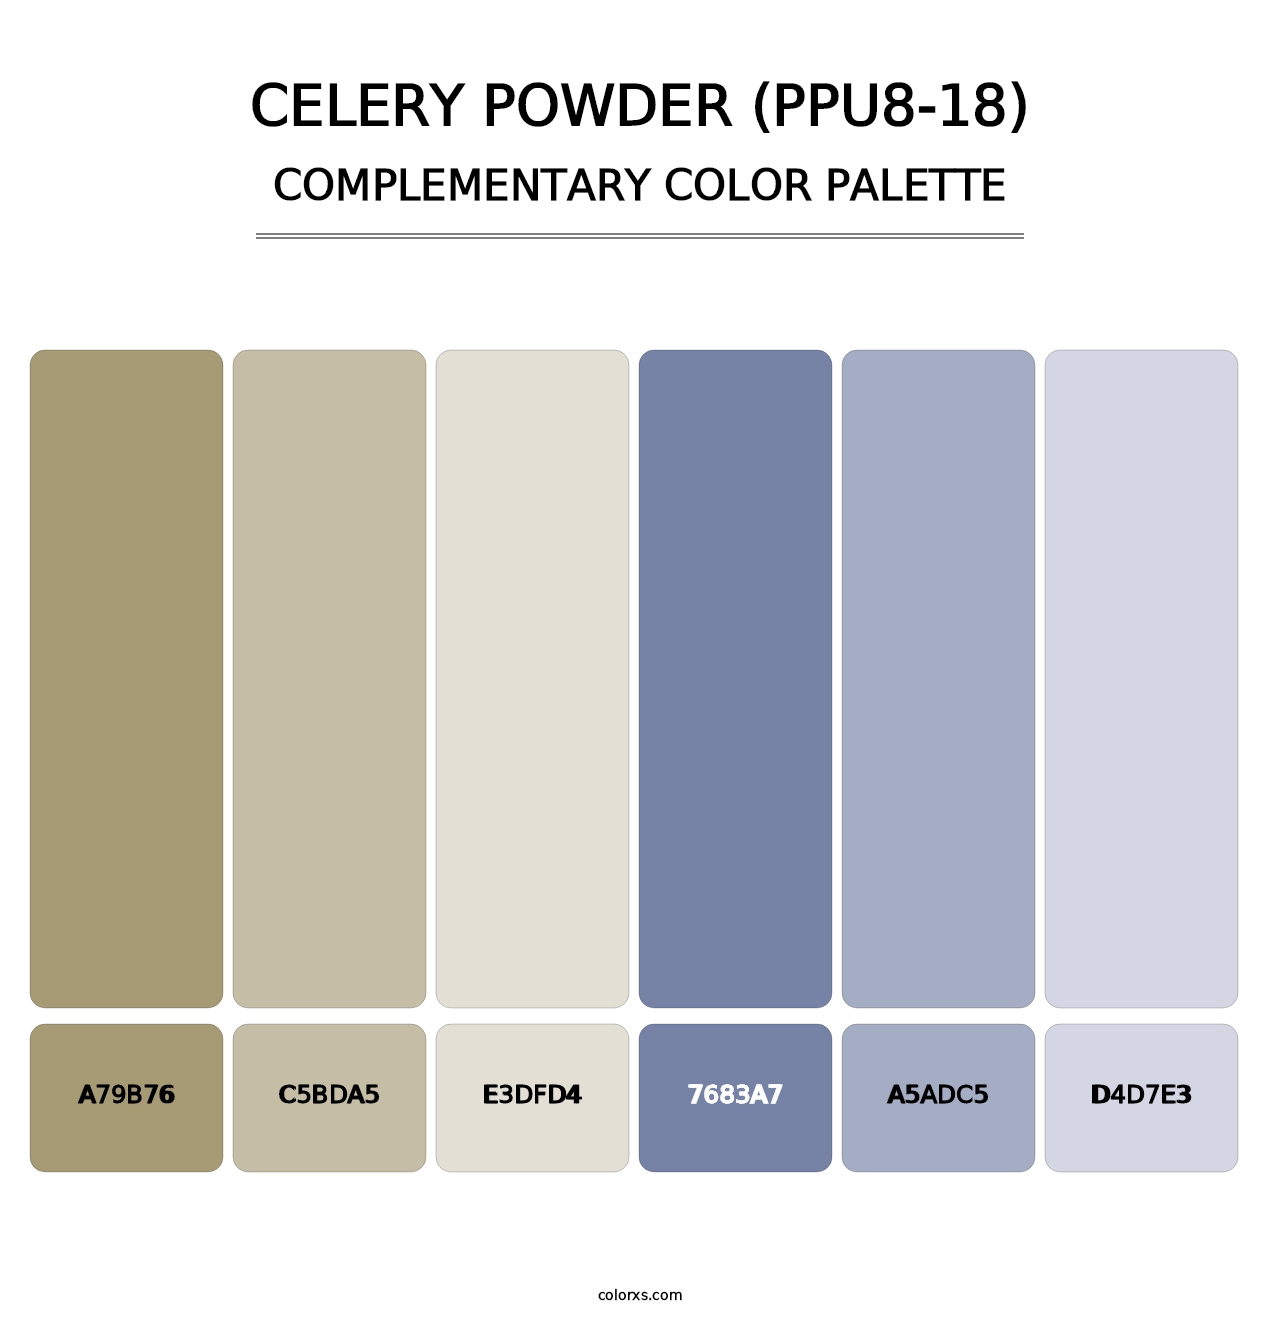 Celery Powder (PPU8-18) - Complementary Color Palette